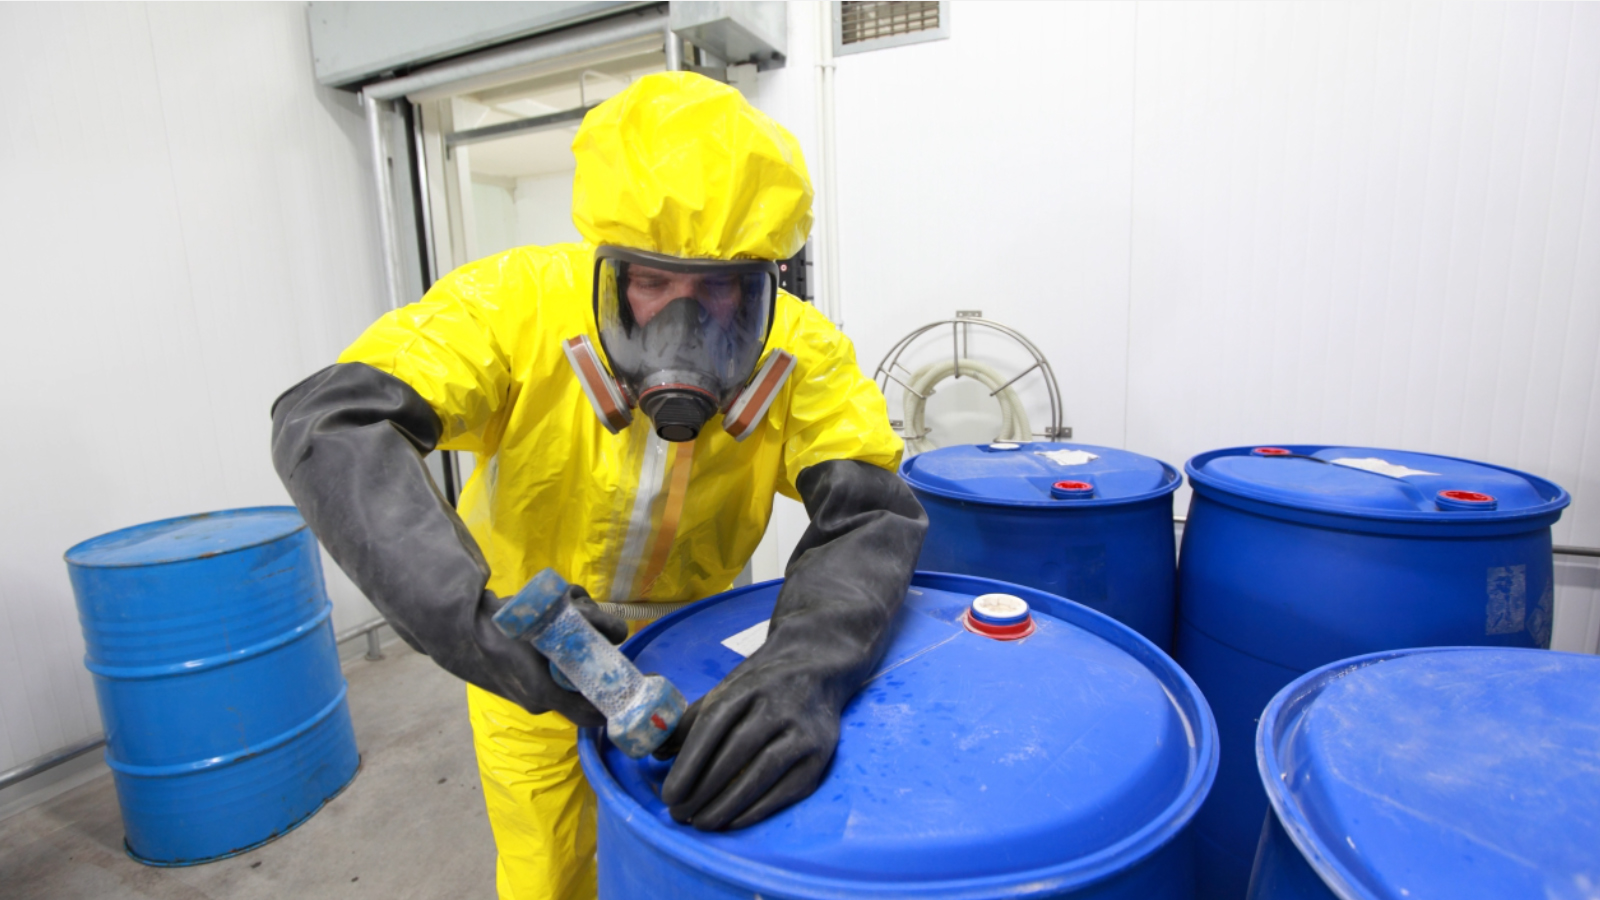 Safety: Working with Chemicals